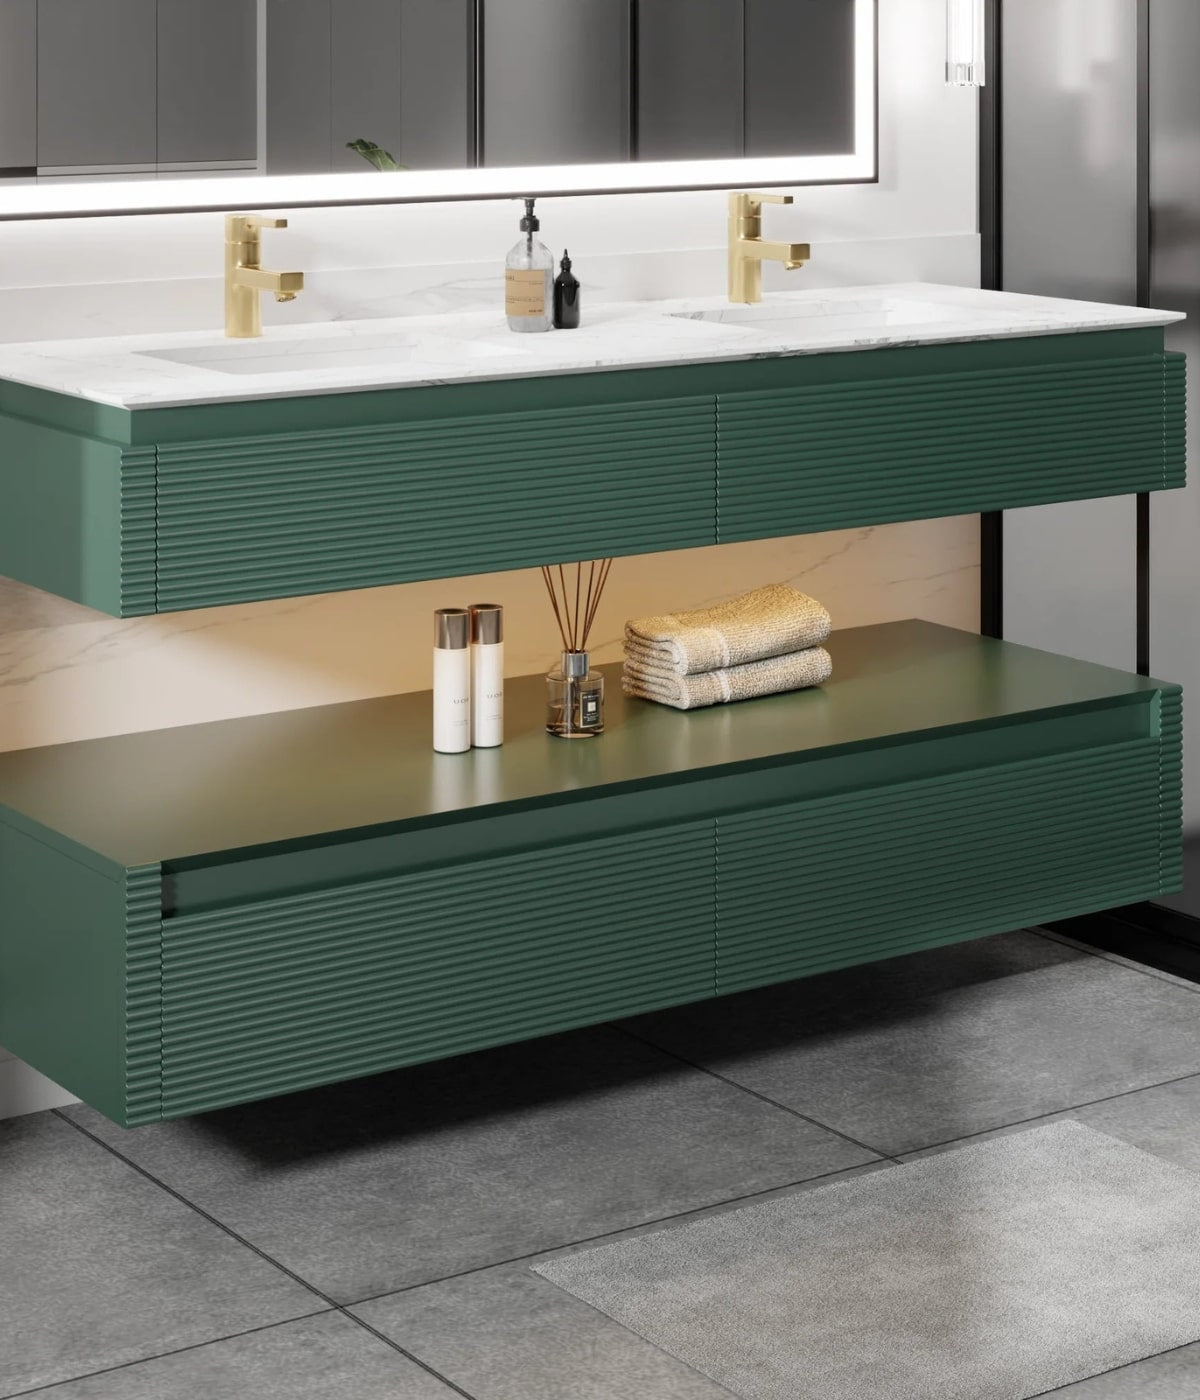 Take a look at our Segeo 60 inch bathroom wood vanity by ExbriteUSA